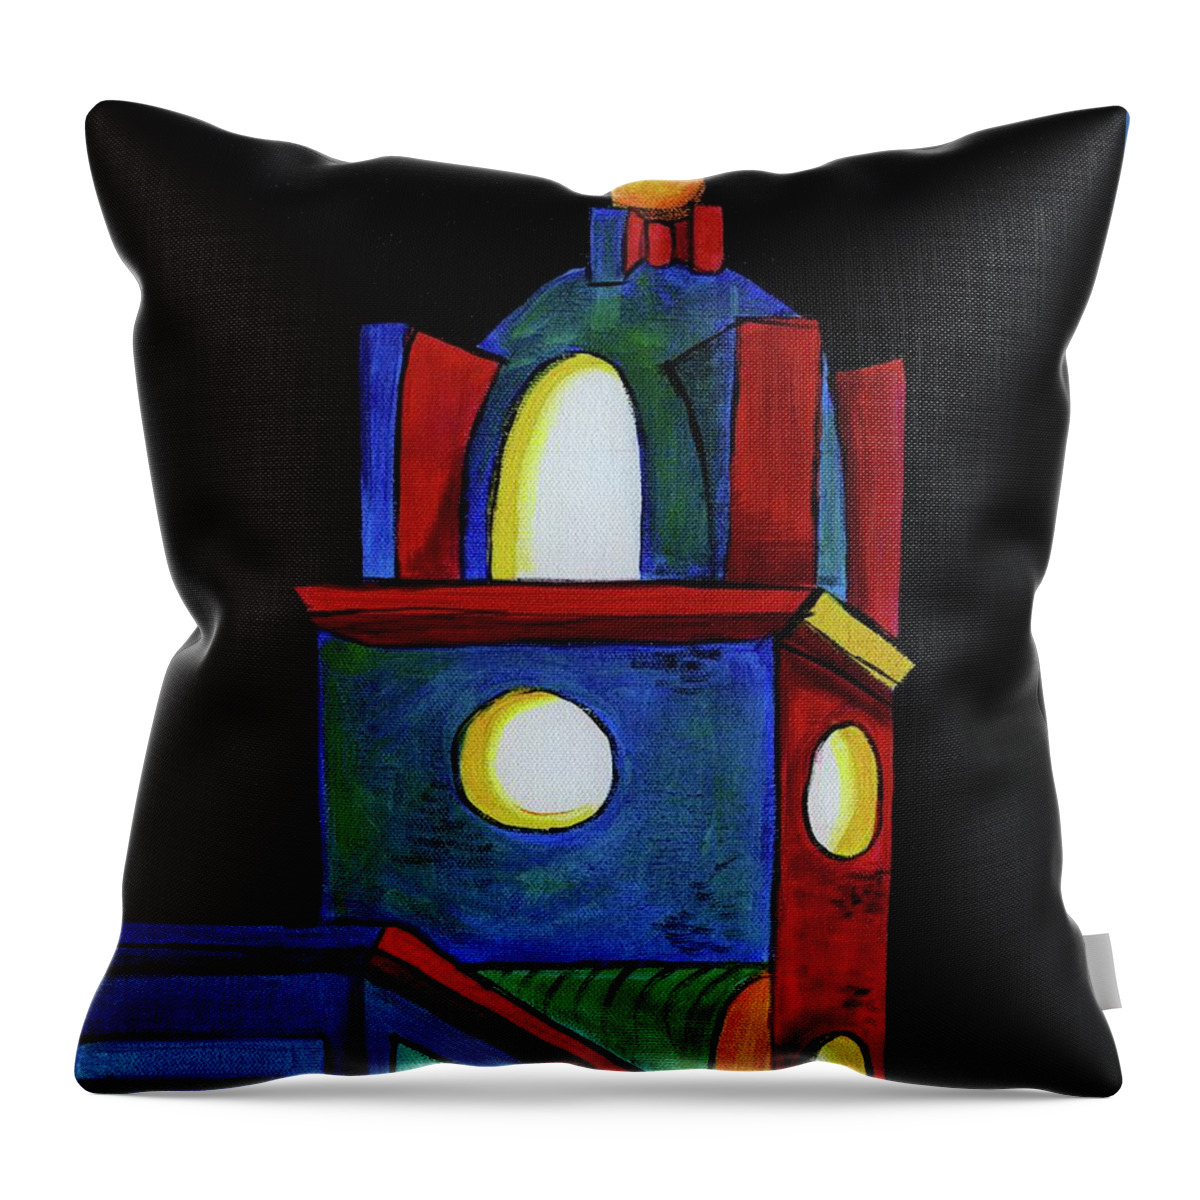 Phoenix Throw Pillow featuring the painting Center for the Future of Arizona by Madeline Dillner